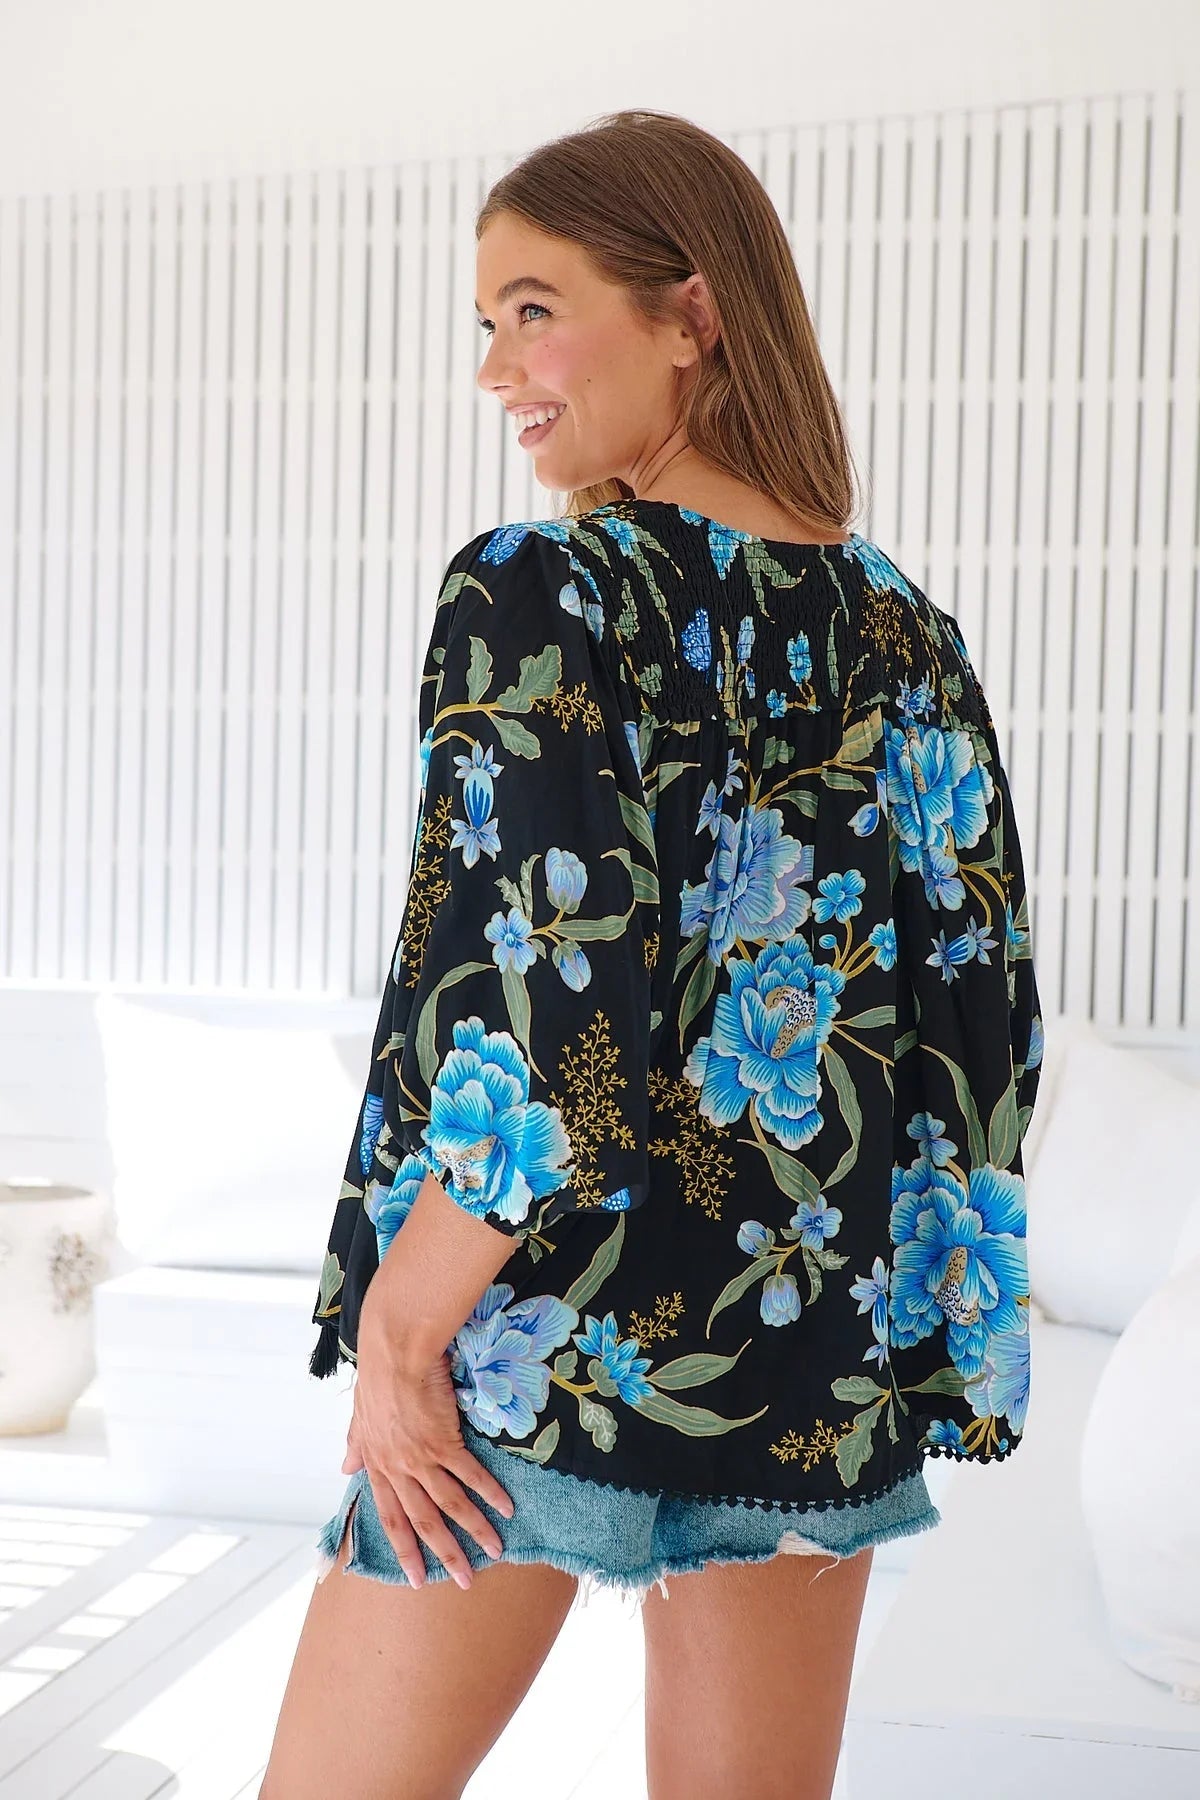 Introducing the Rue Top - Midnight Sapphire, a playful twist on a classic blouse. With its long, draped length and mid-sleeves with cuffs, this top is both elegant and quirky. The tassel strings and v-neck add a fun element to this otherwise sophisticated piece.